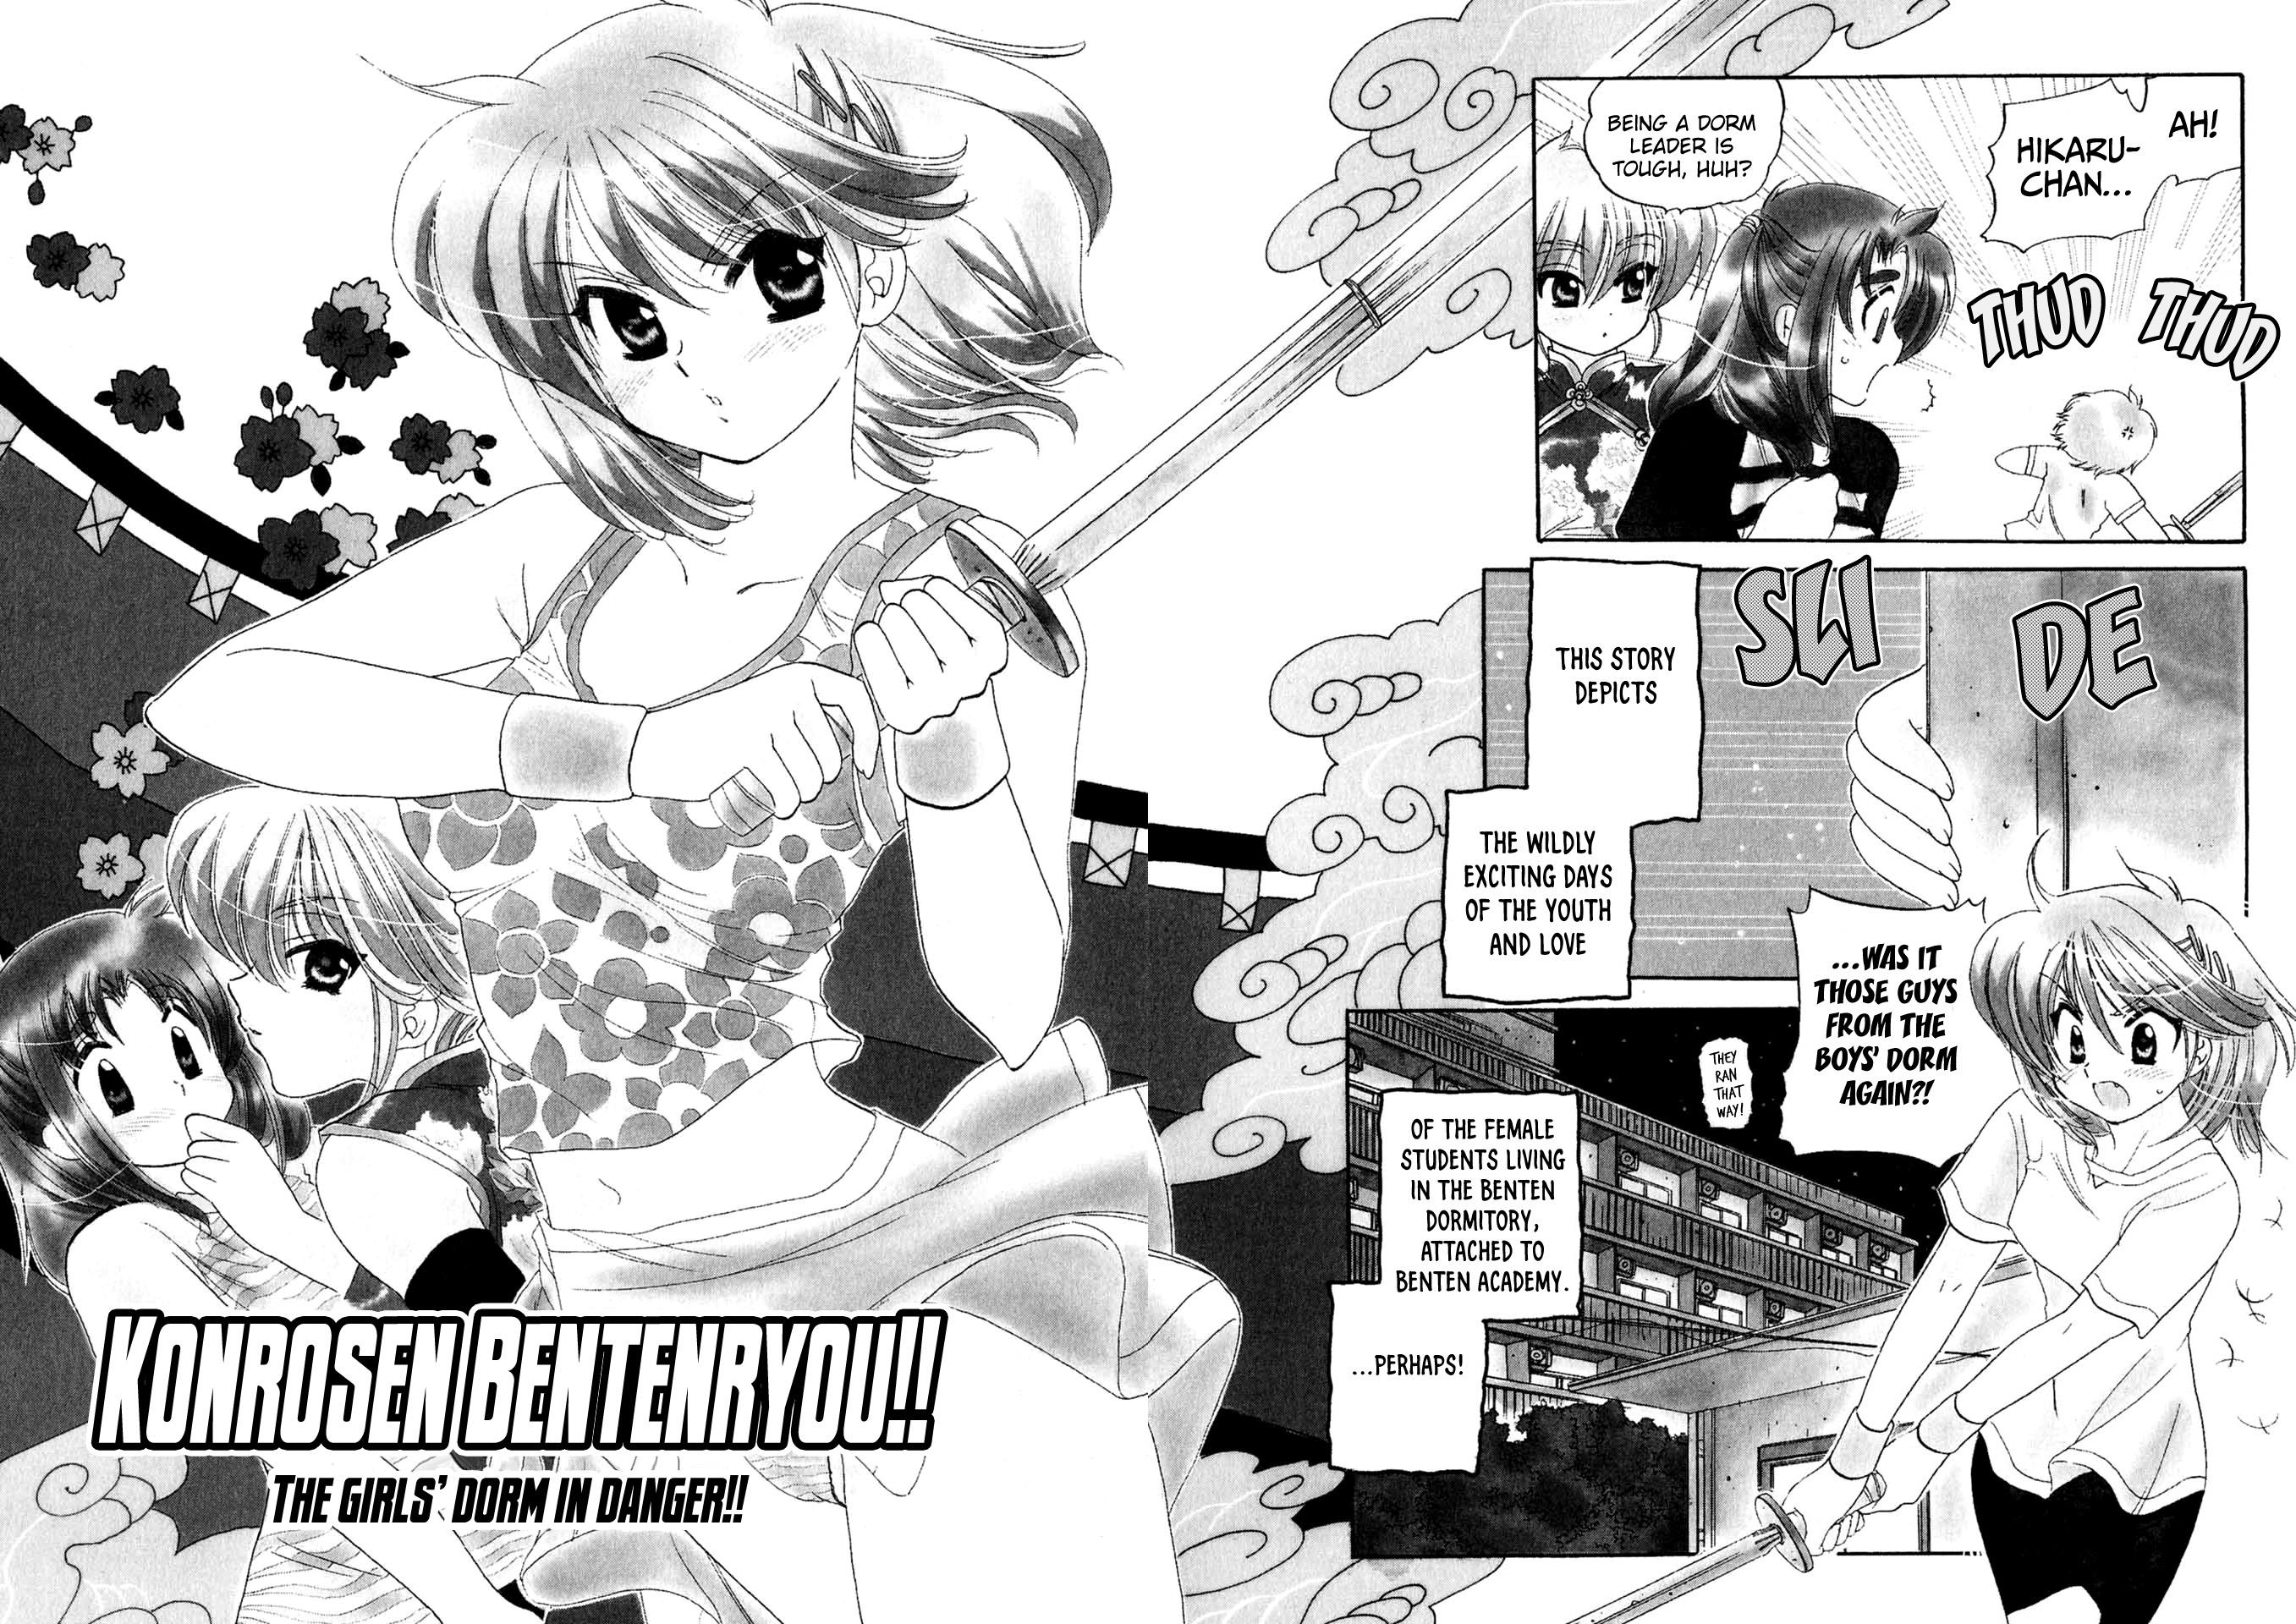 Osawagase Bentenryou Vol.1 Chapter 4: The Girls' Dorm In Danger!! - Picture 3